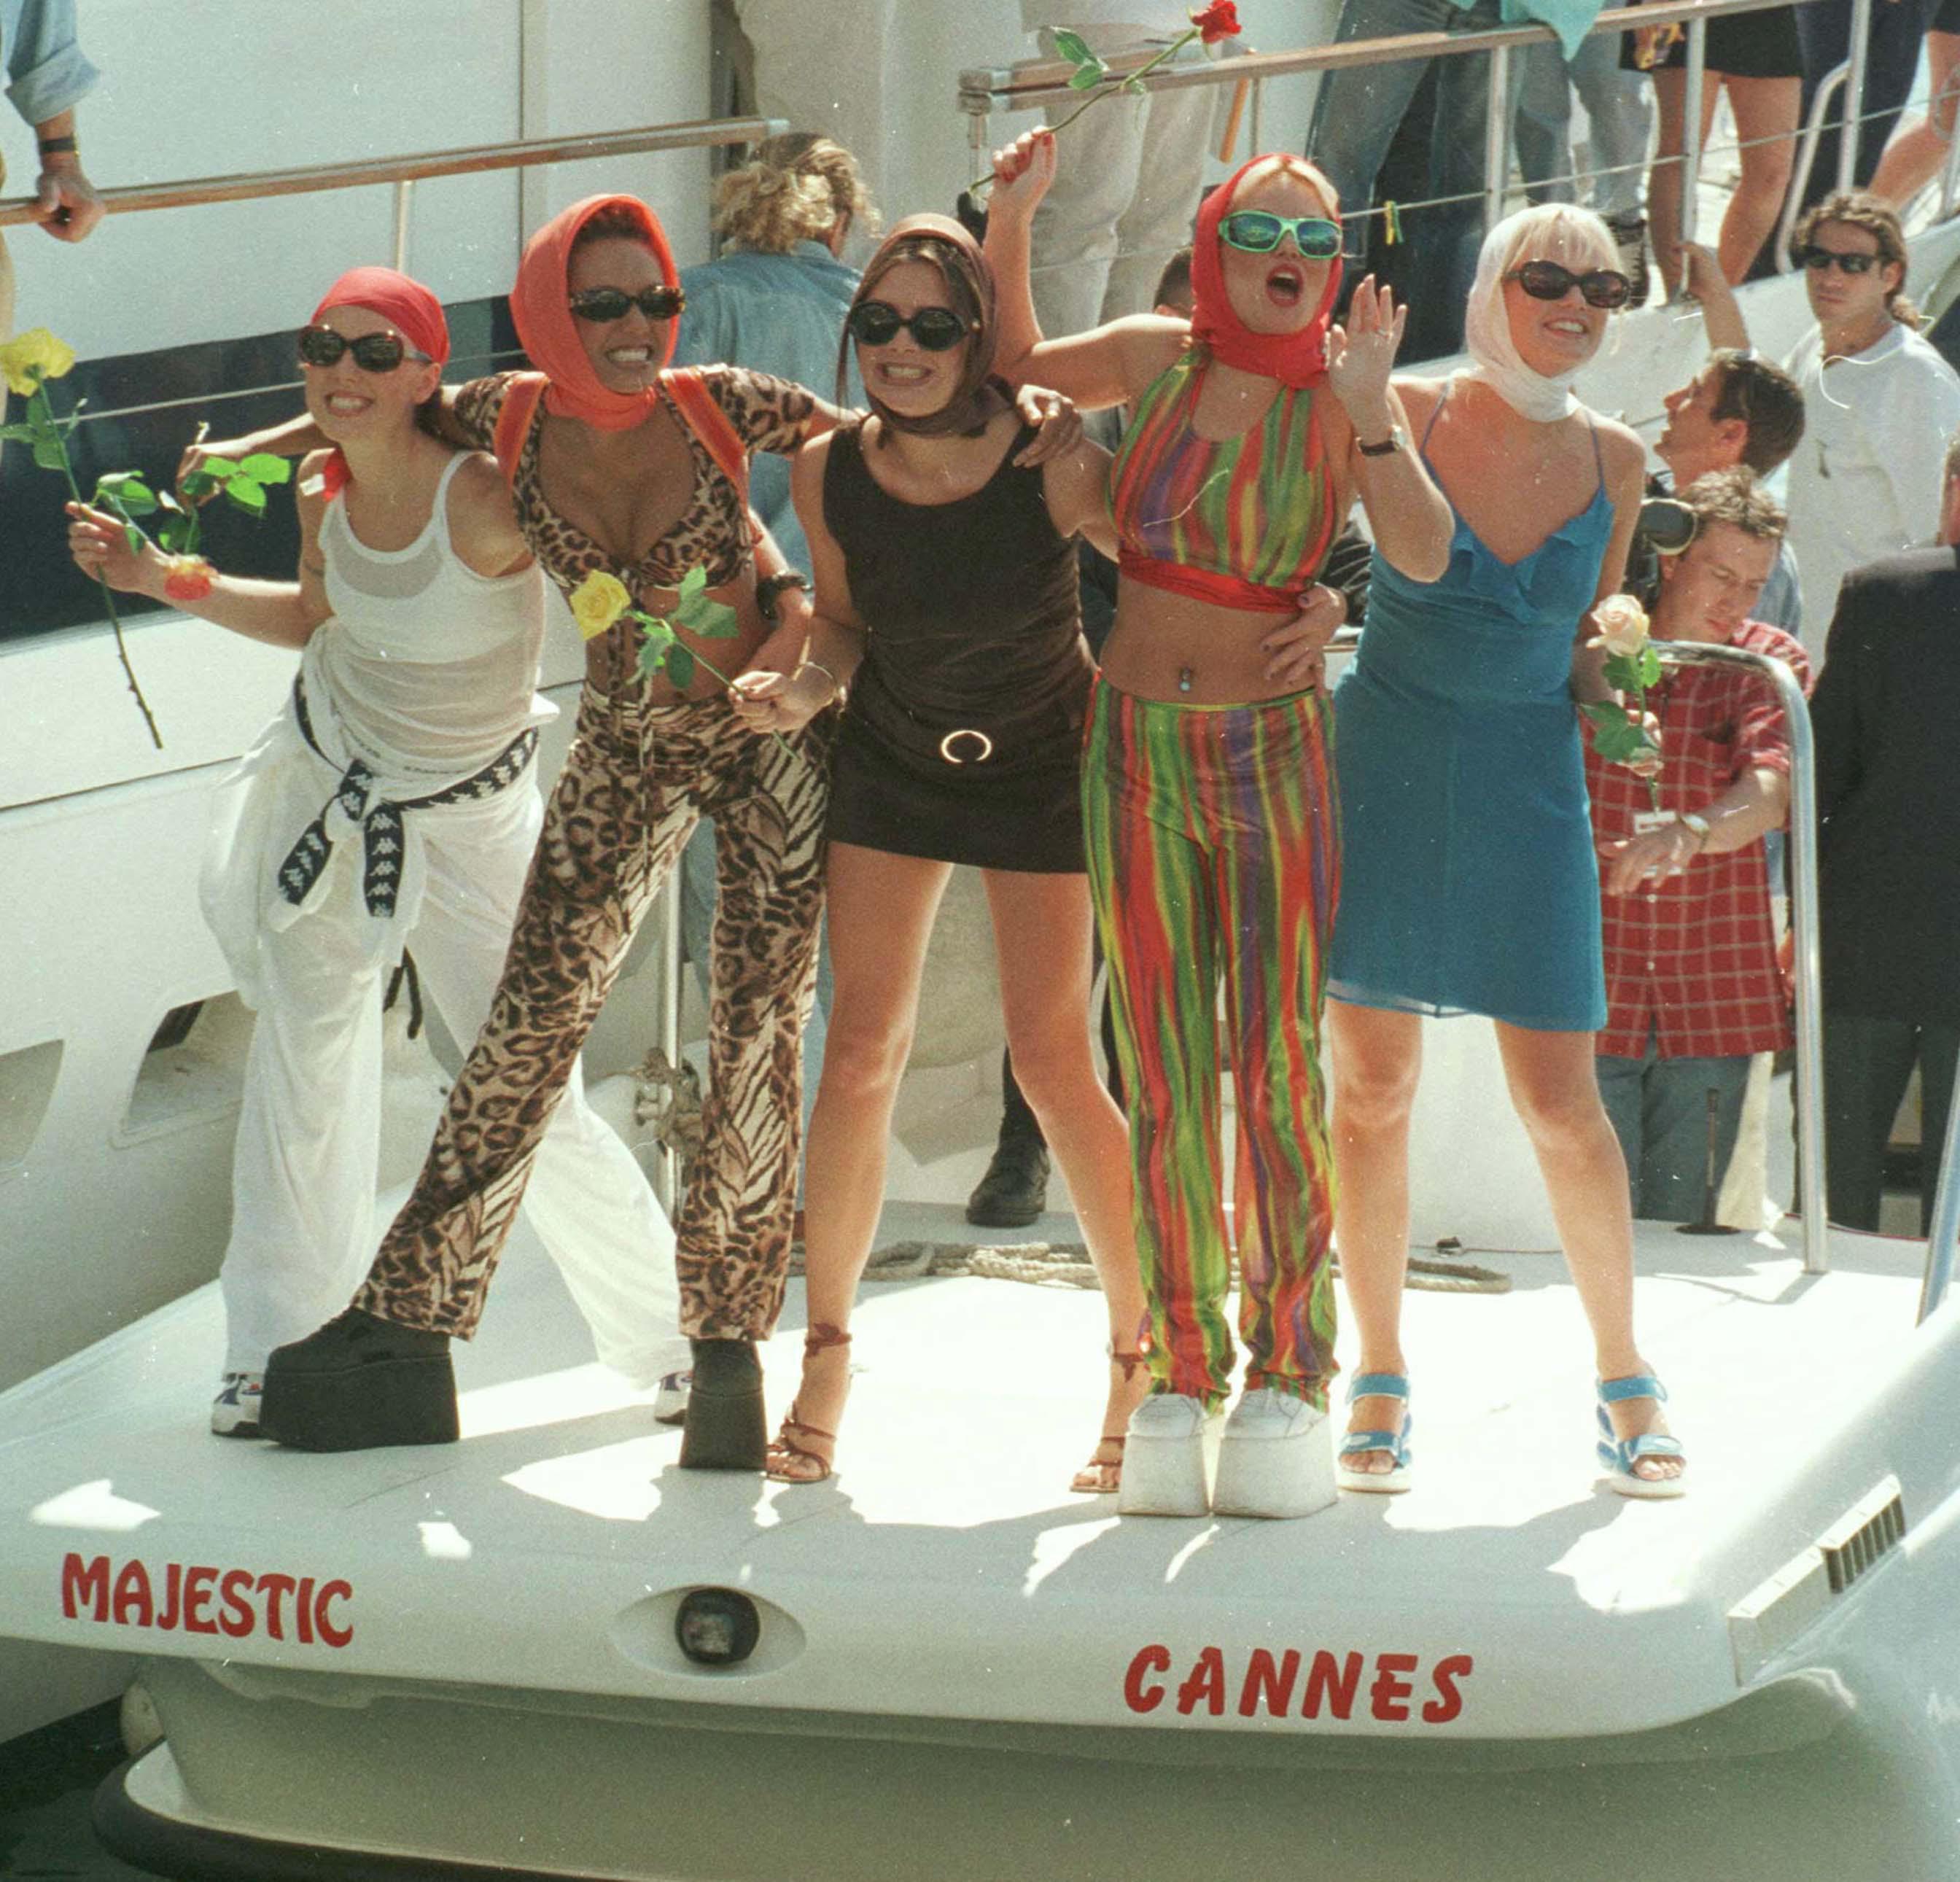 The Spice Girls standing on a boat at Cannes Festival, 1997